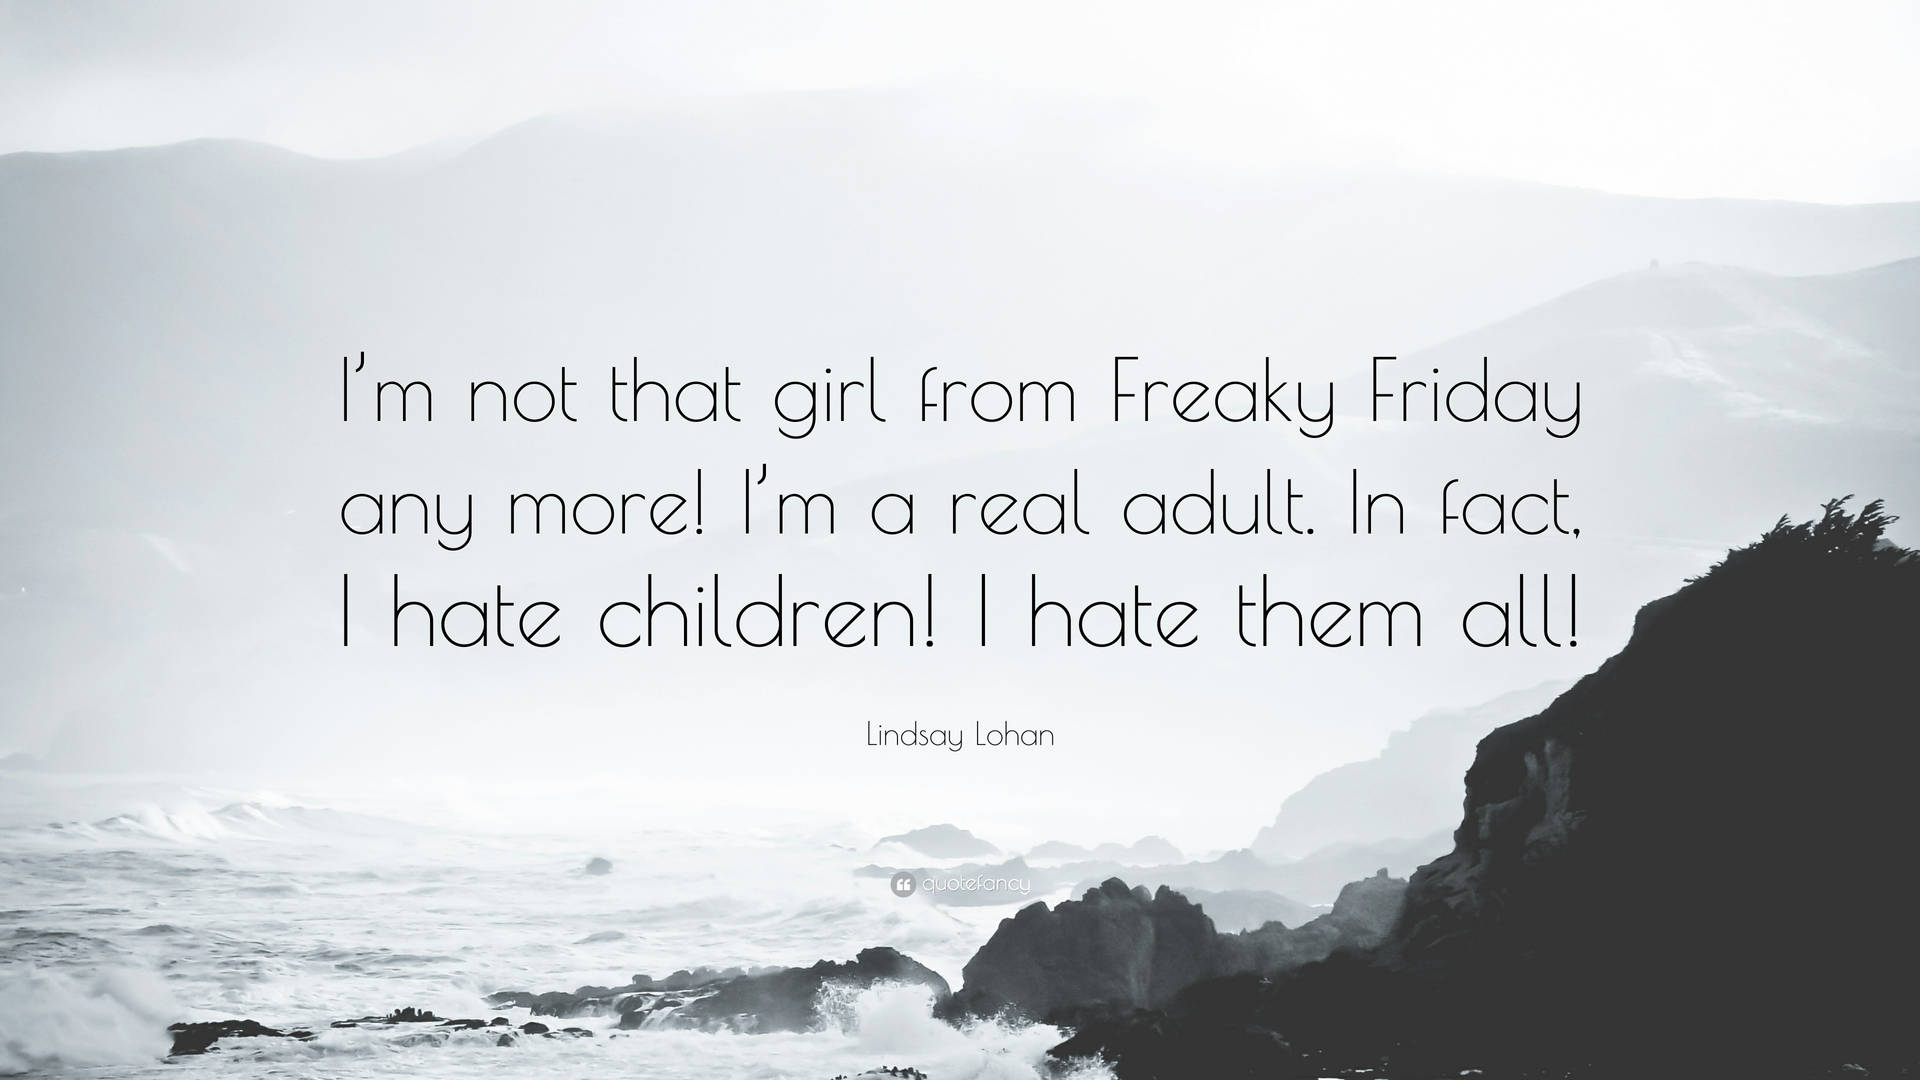 Freaky Friday Lindsay Lohan Quote Oceanside Background